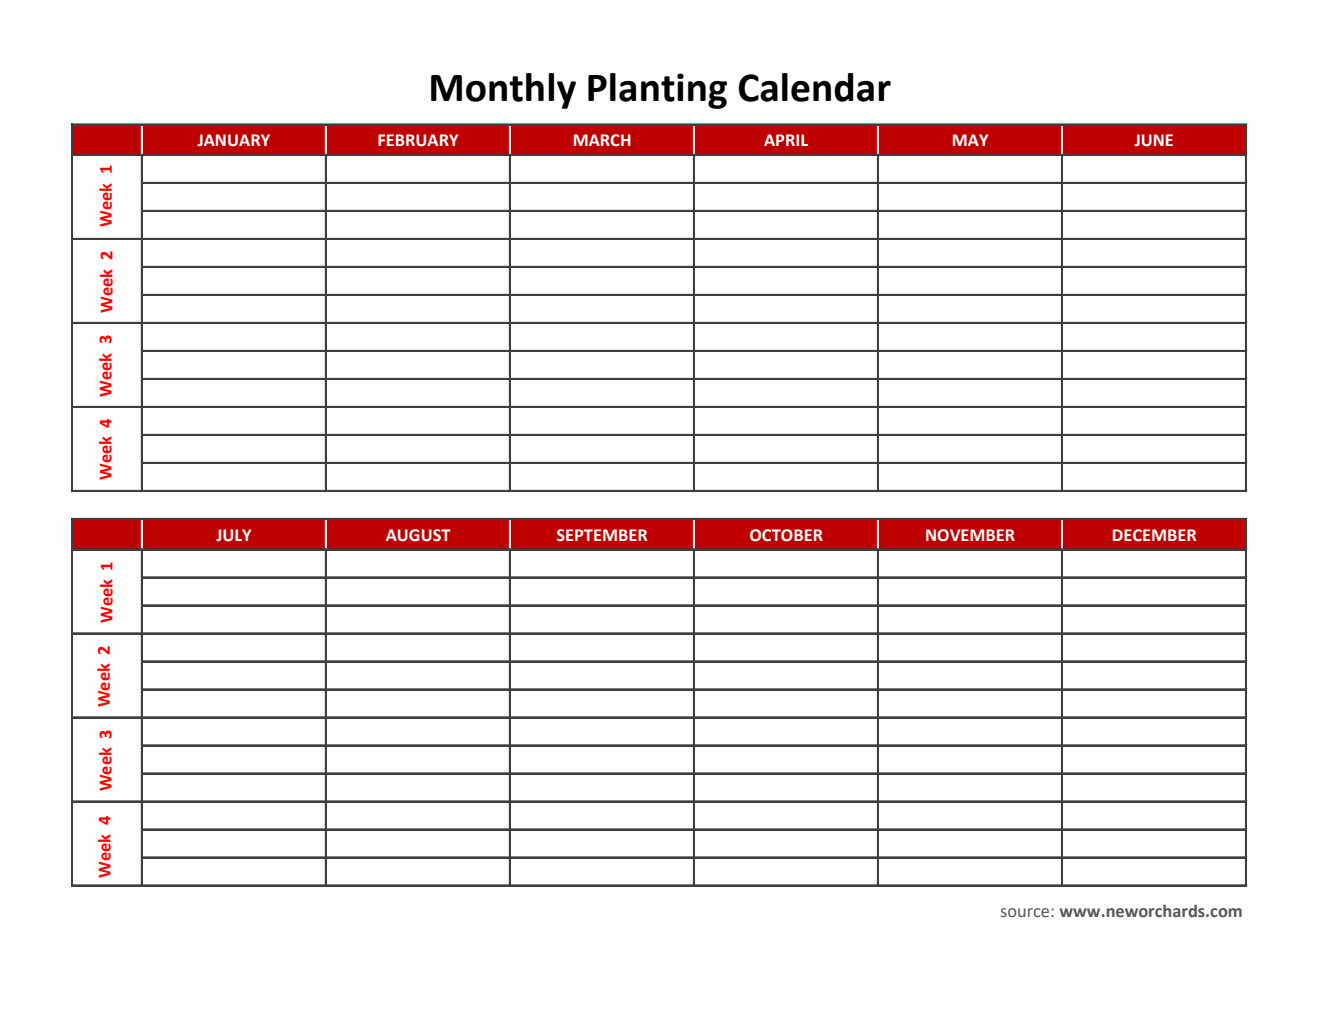 Editable Monthly Planting Calendar in Excel